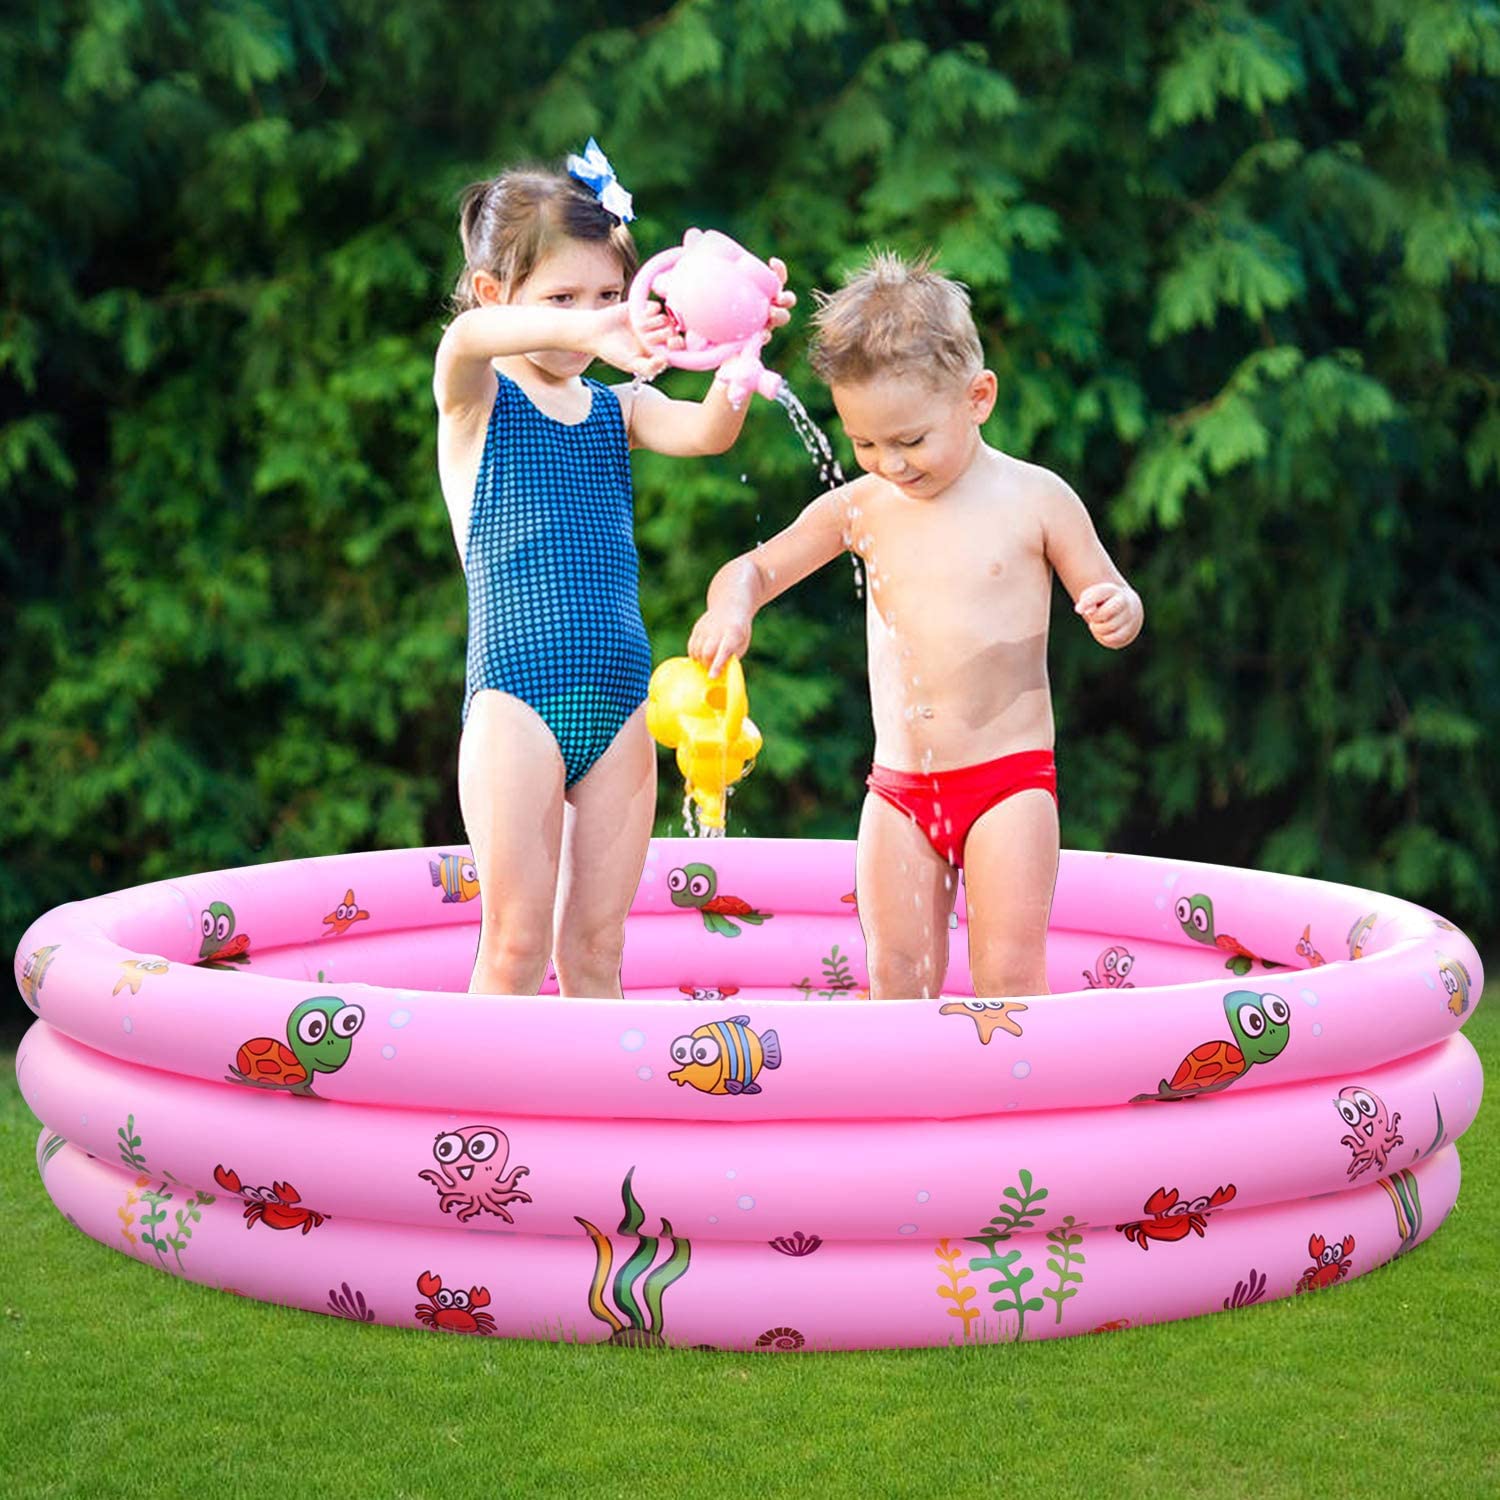 Game　Center　Children　Pool　Inflatable　Play　Above　Swimming　Pool,55　Water　inch　for　Pool　Backyard　Kids　Round　Pool　Ground　Toddlers　Inflatable　Cartoon　Kids　Outdoor　Pink